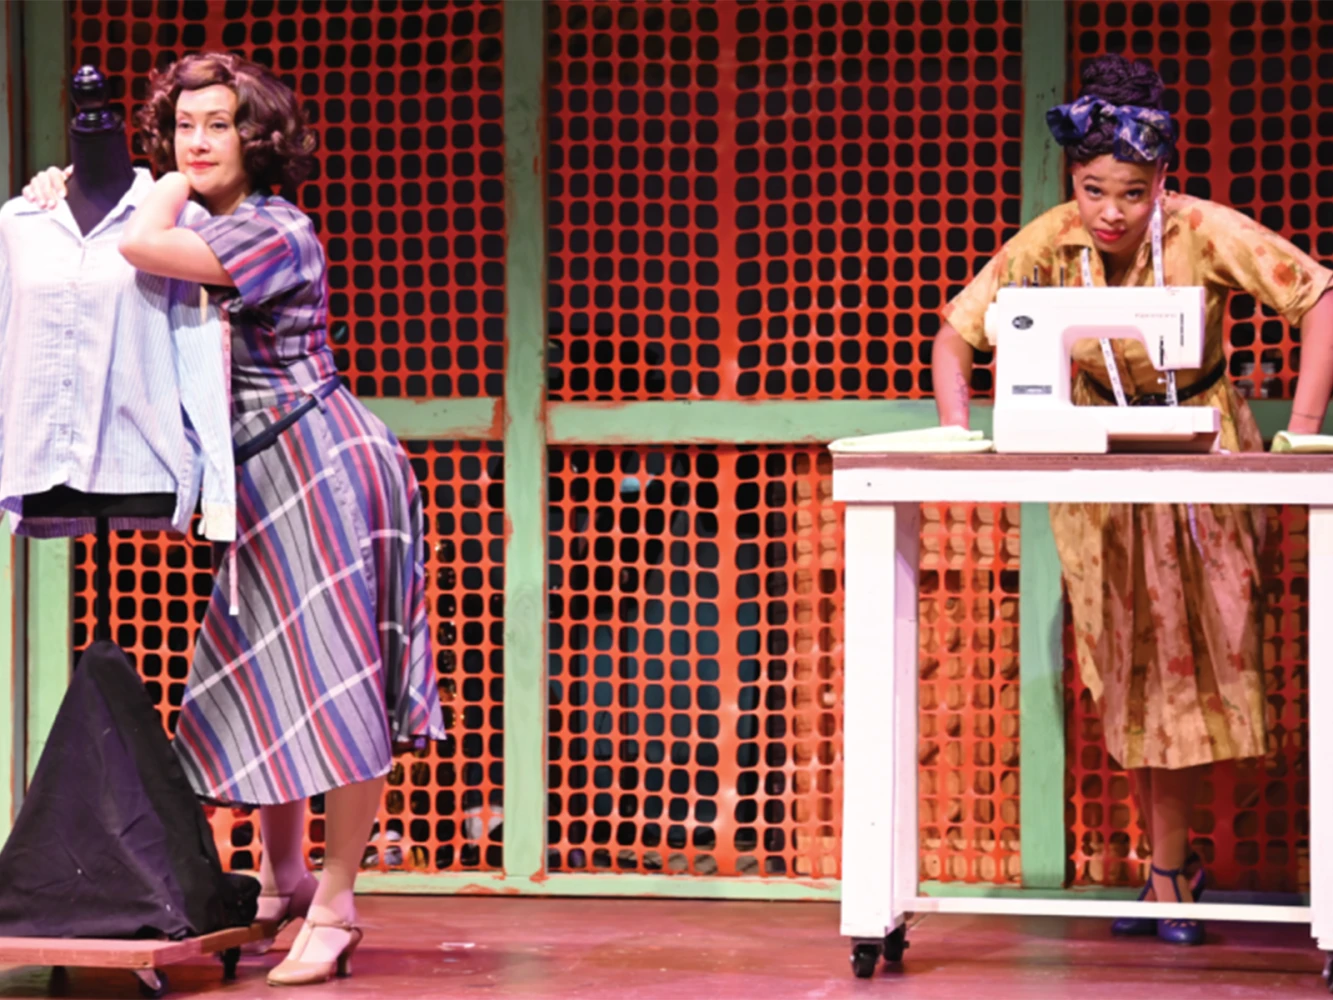 The Pajama Game: What to expect - 3